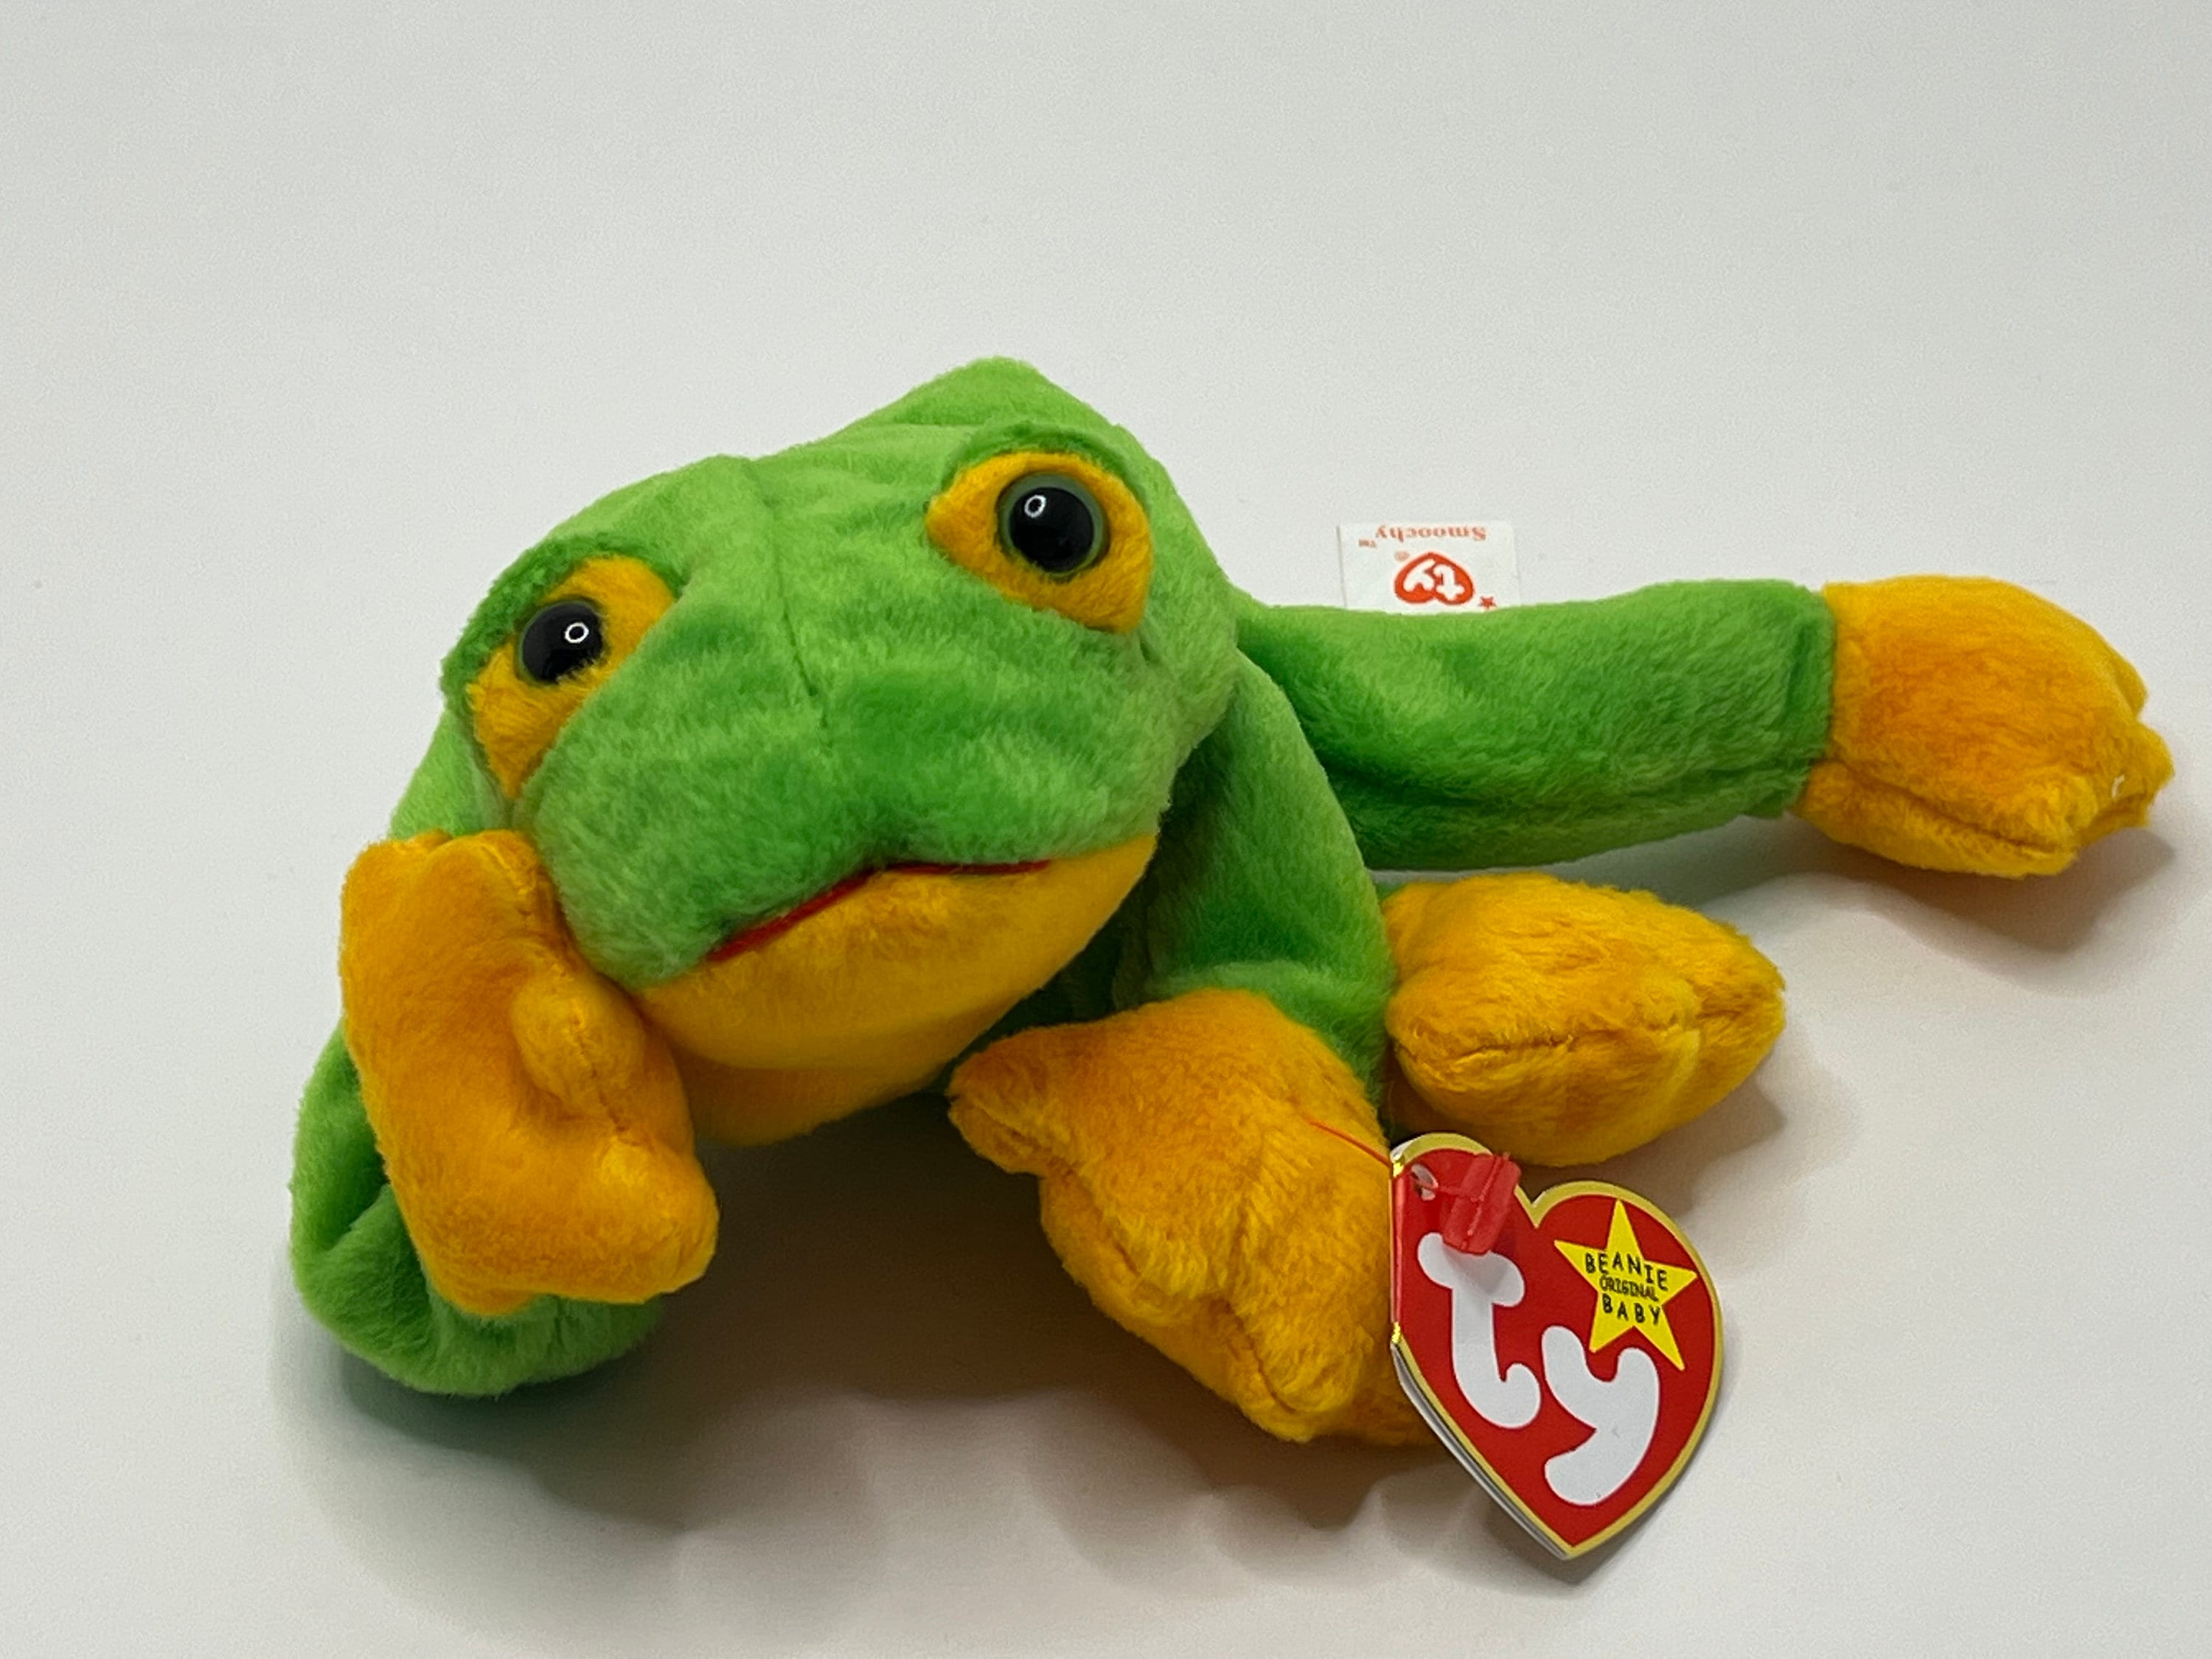 Rare Beanie Babies Frog, Smoochy the Frog, Vintage Toys From the